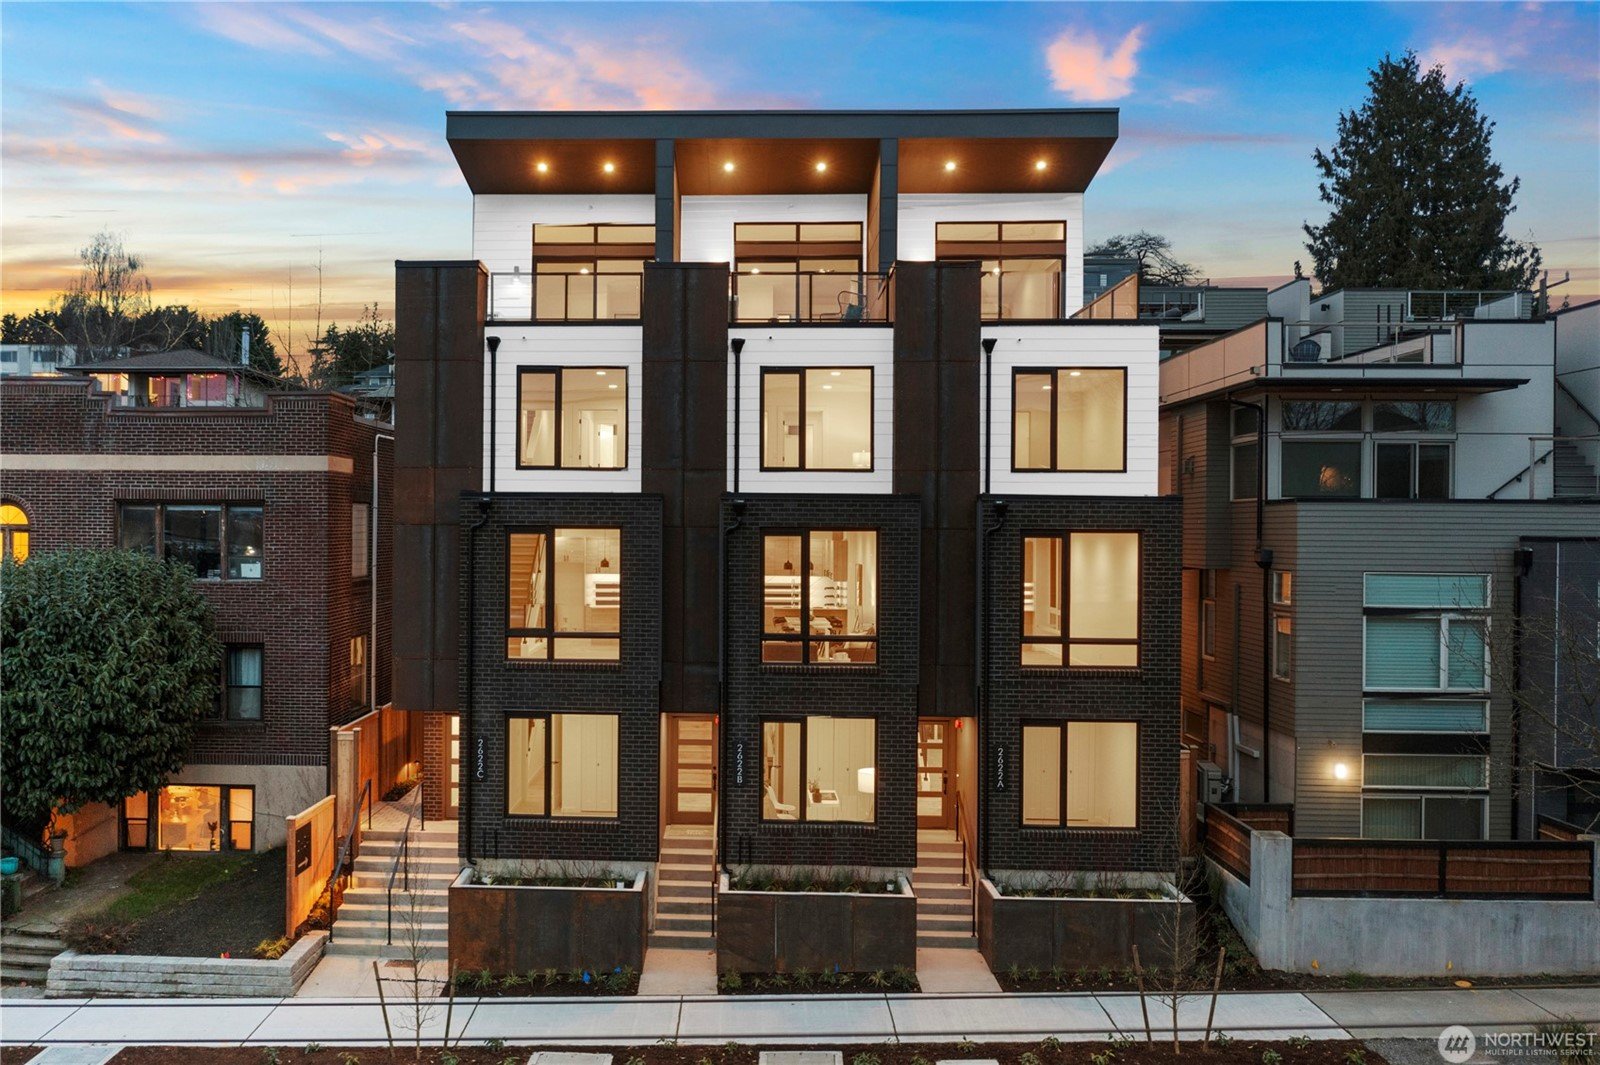 Newly constructed townhouse in the Eastlake neighborhood